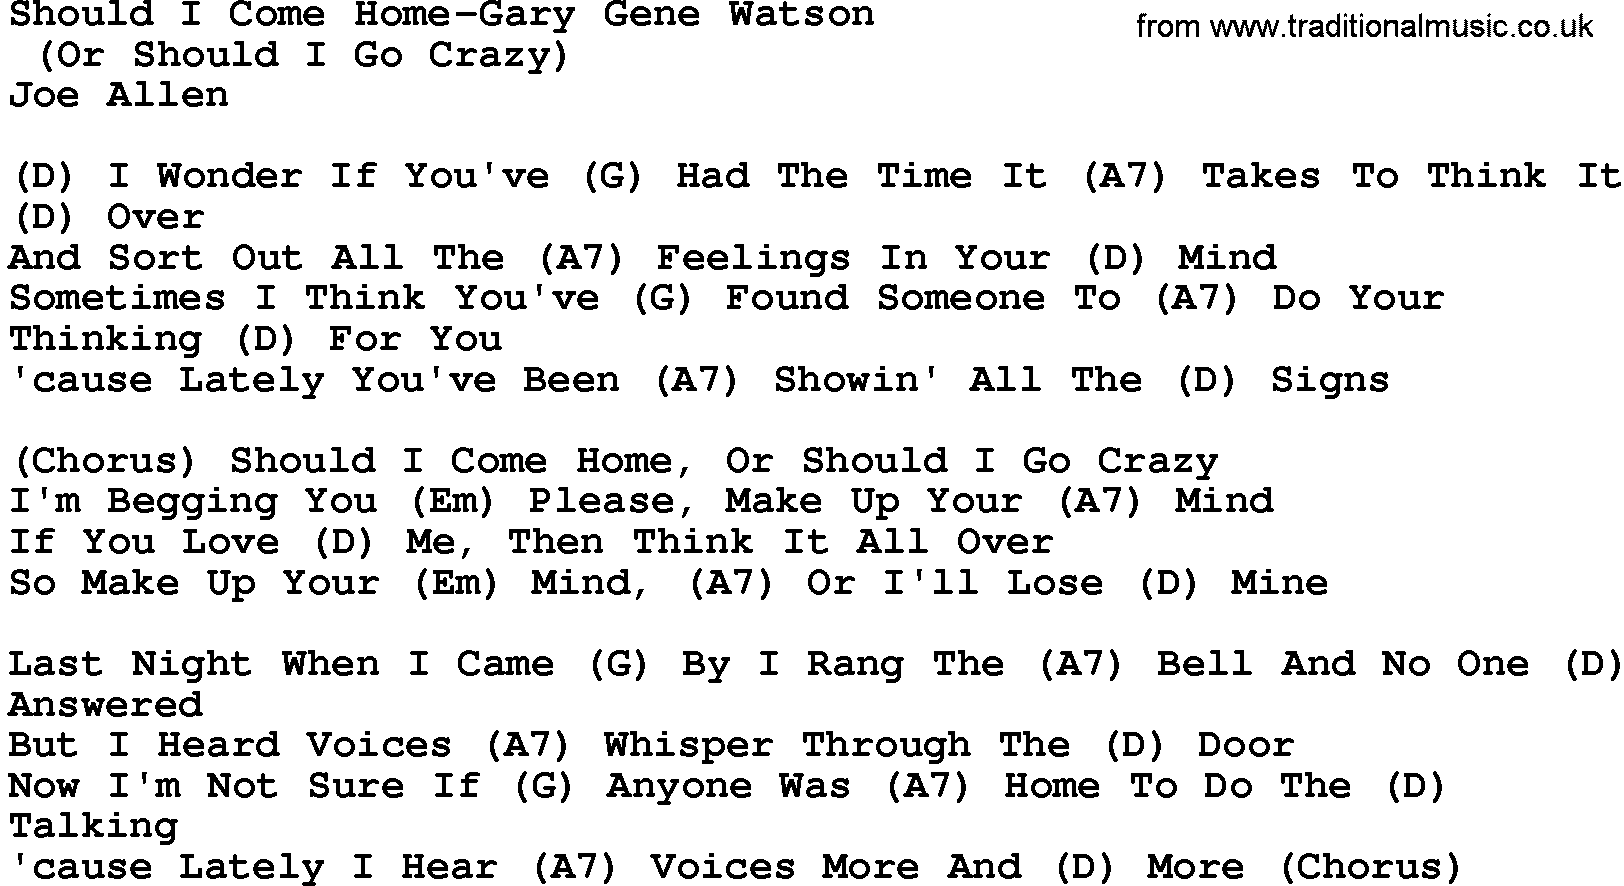 Country music song: Should I Come Home-Gary Gene Watson lyrics and chords